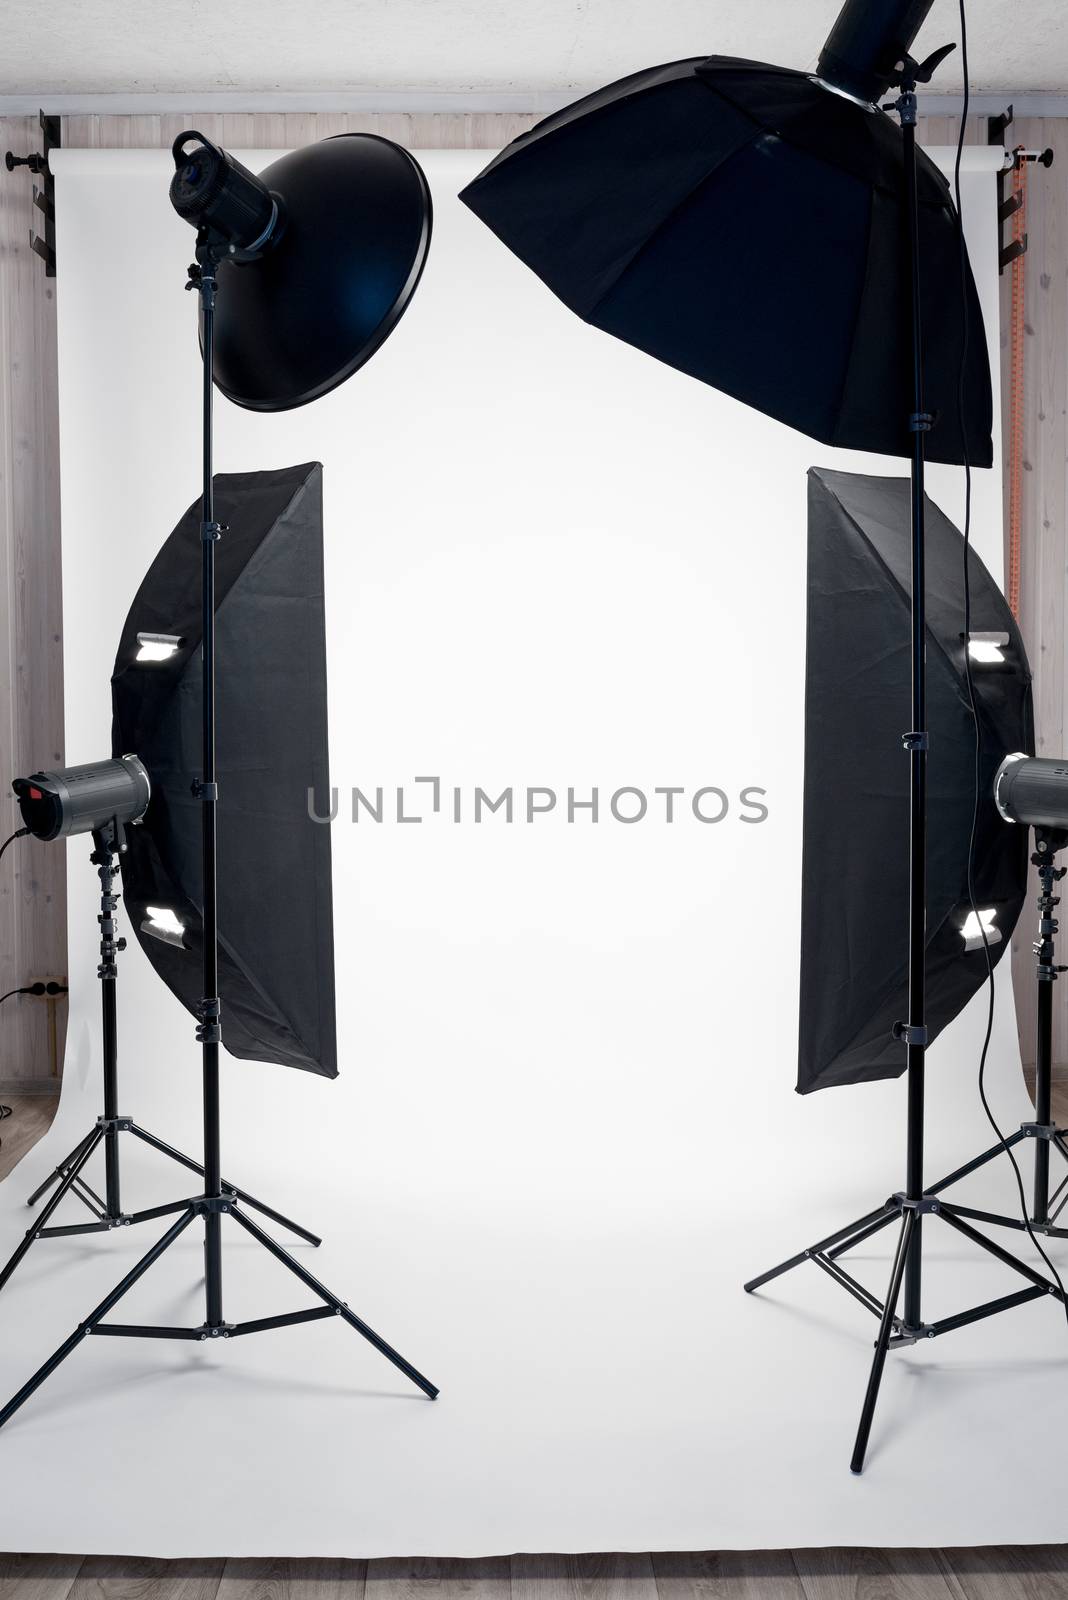 Photo studio equipment and white paper background indoors, no pe by kosmsos111